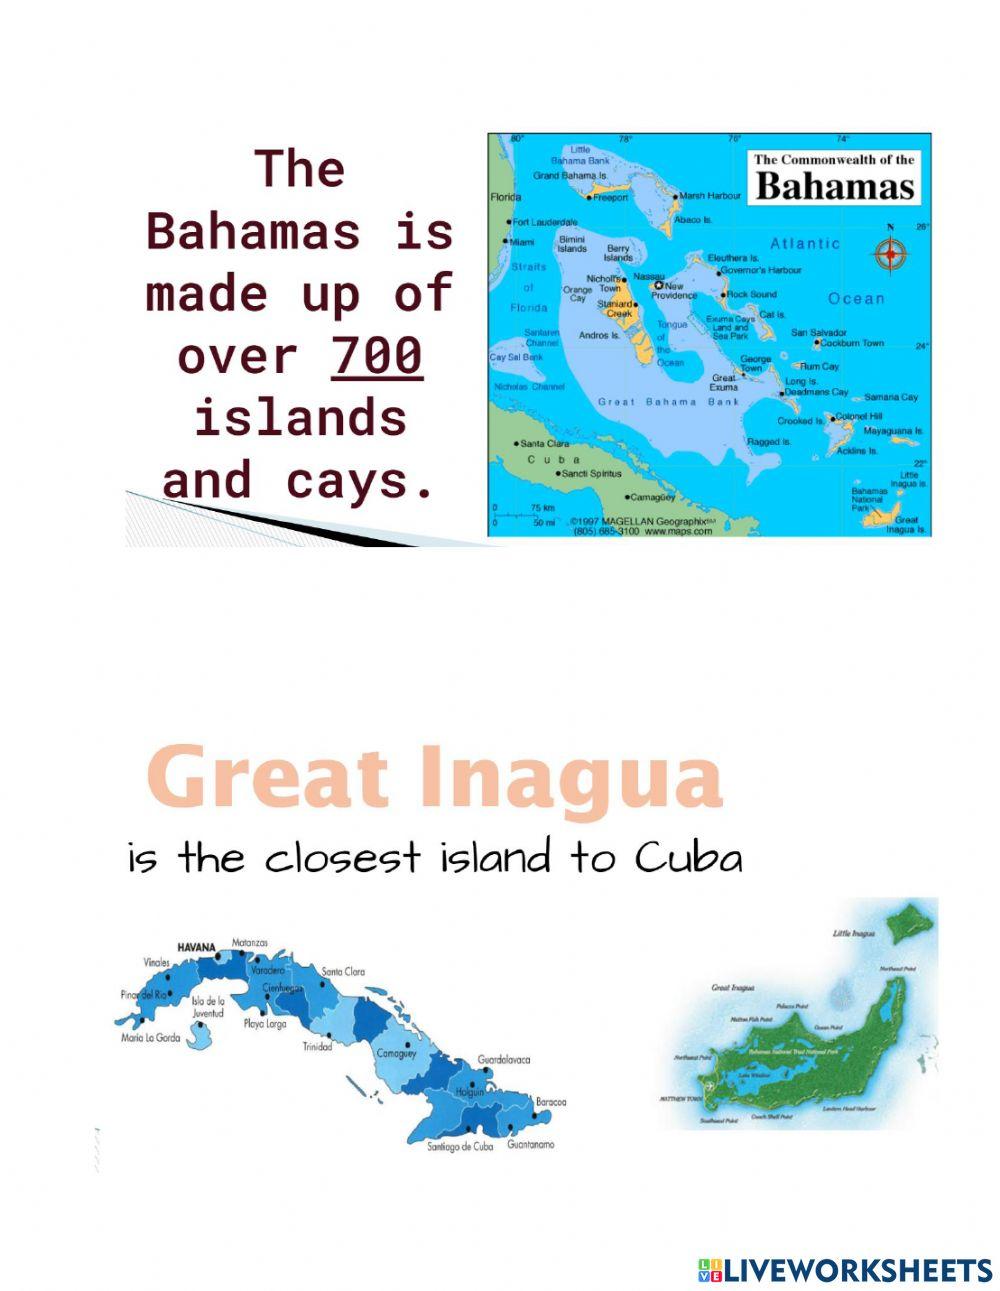 Where In The World Is The Bahamas?